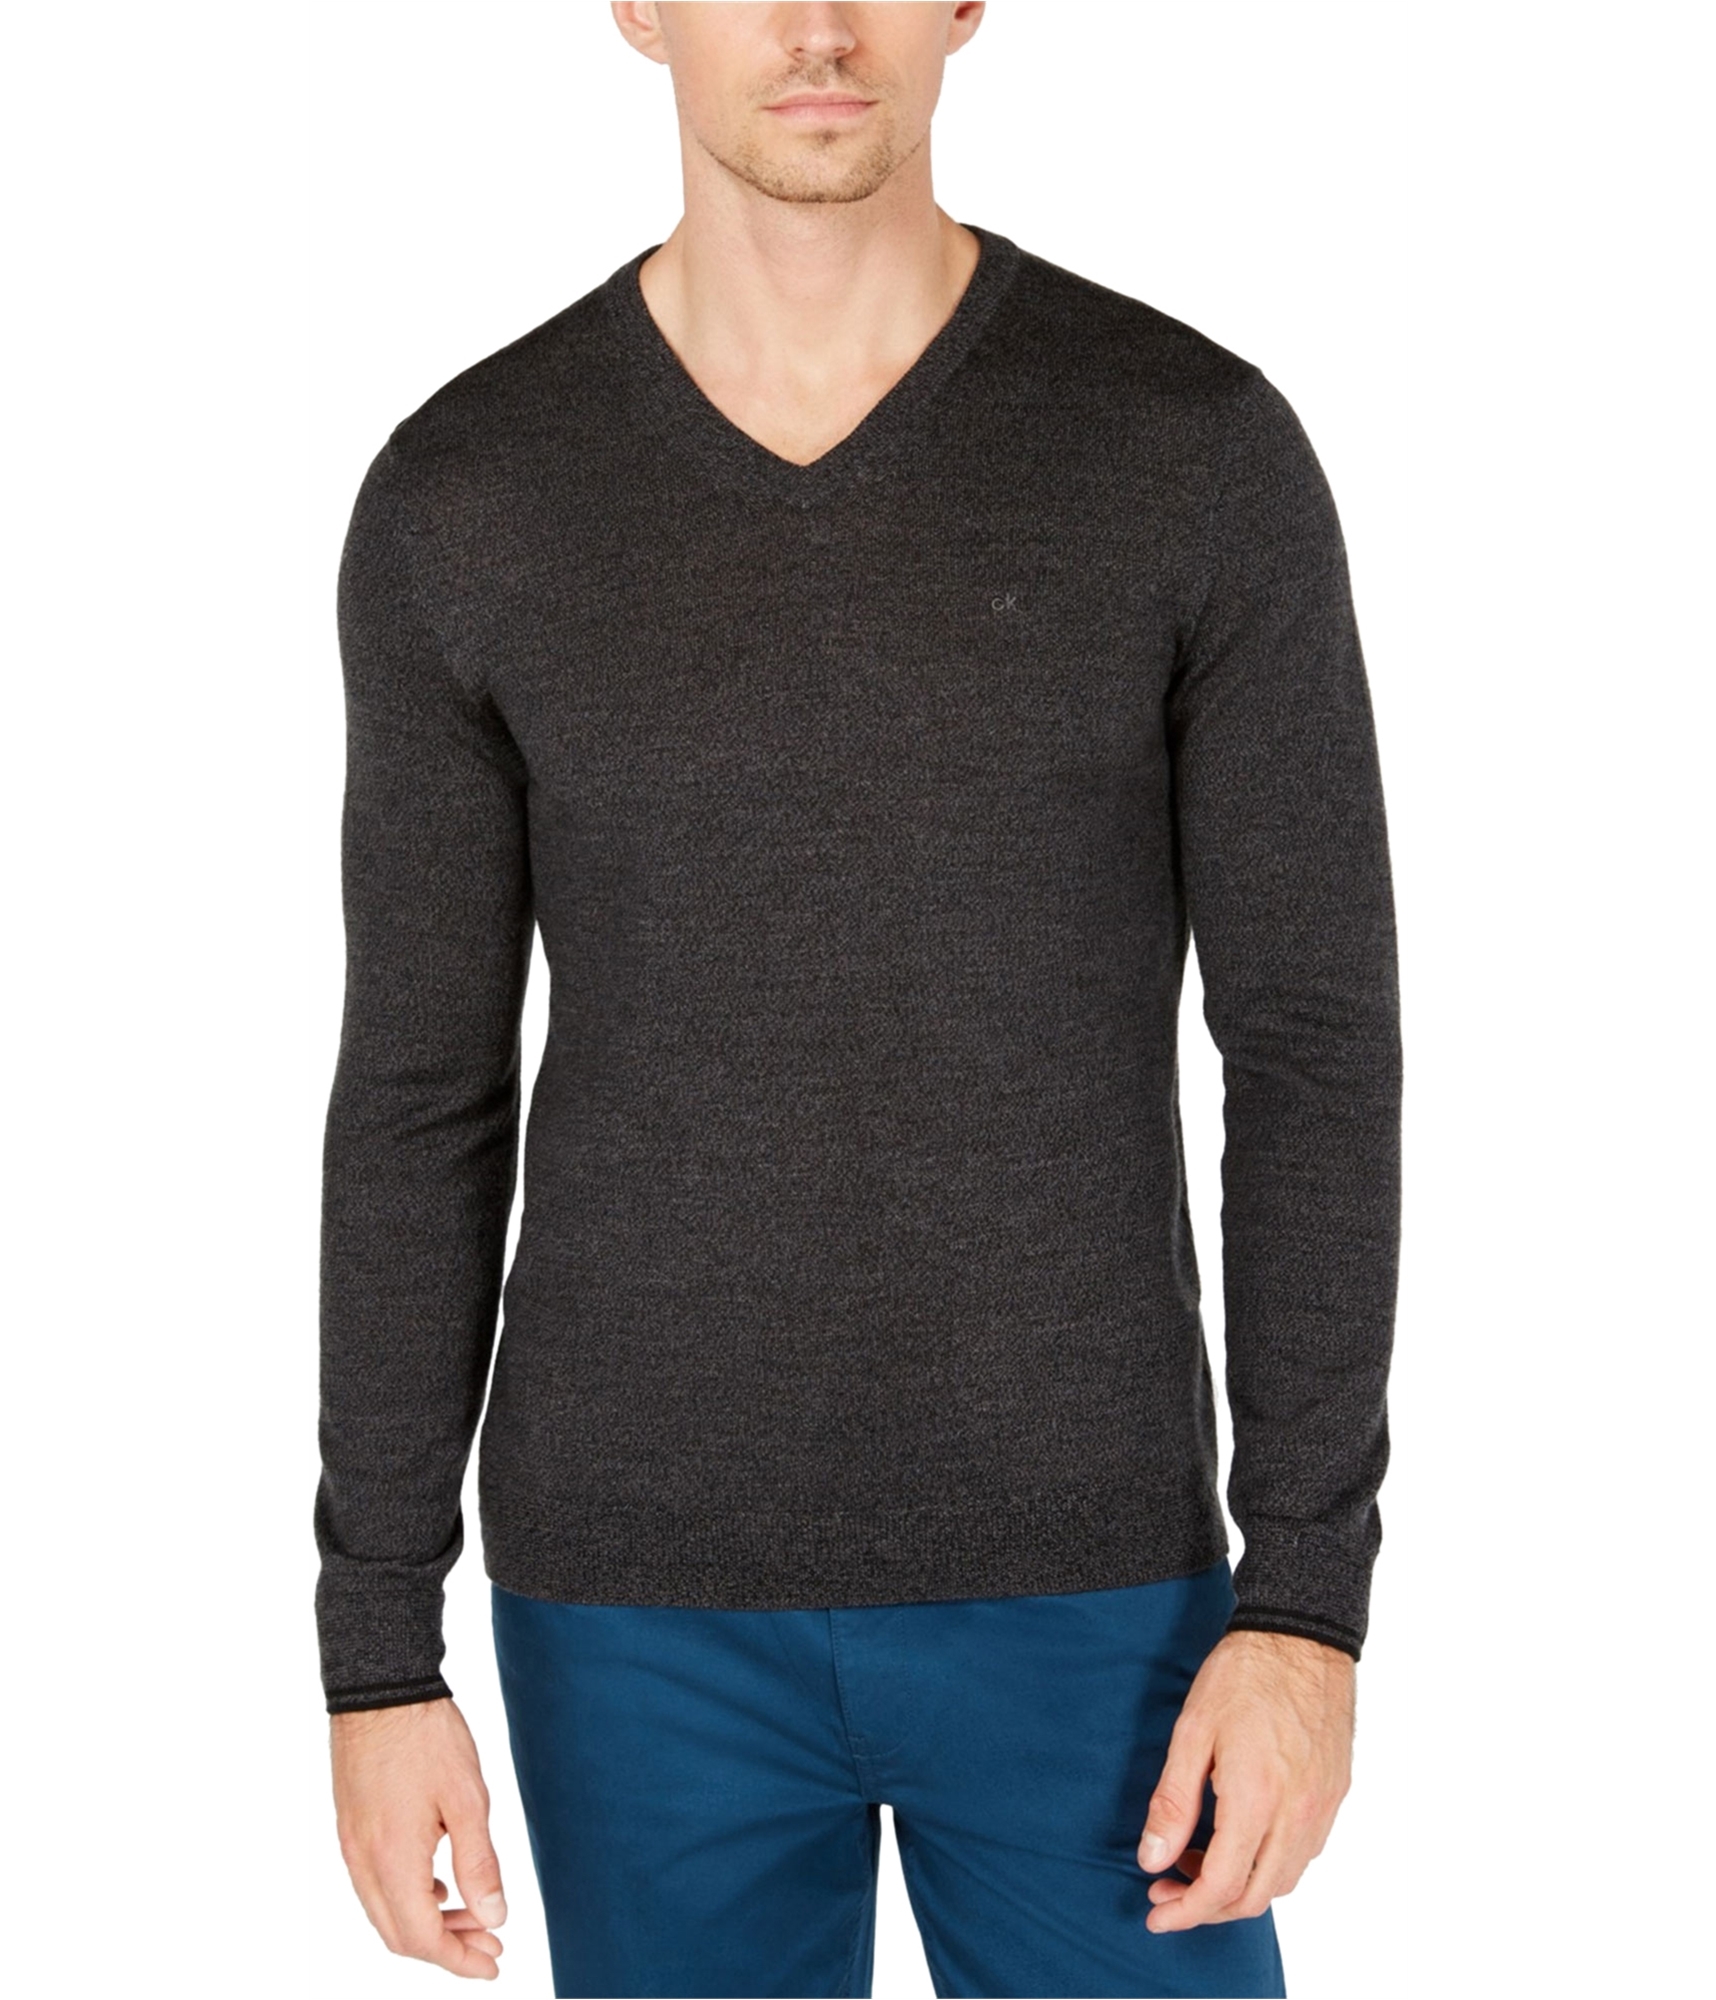 Buy a Calvin Klein Mens Extra Fine Merino Pullover Sweater | Tagsweekly